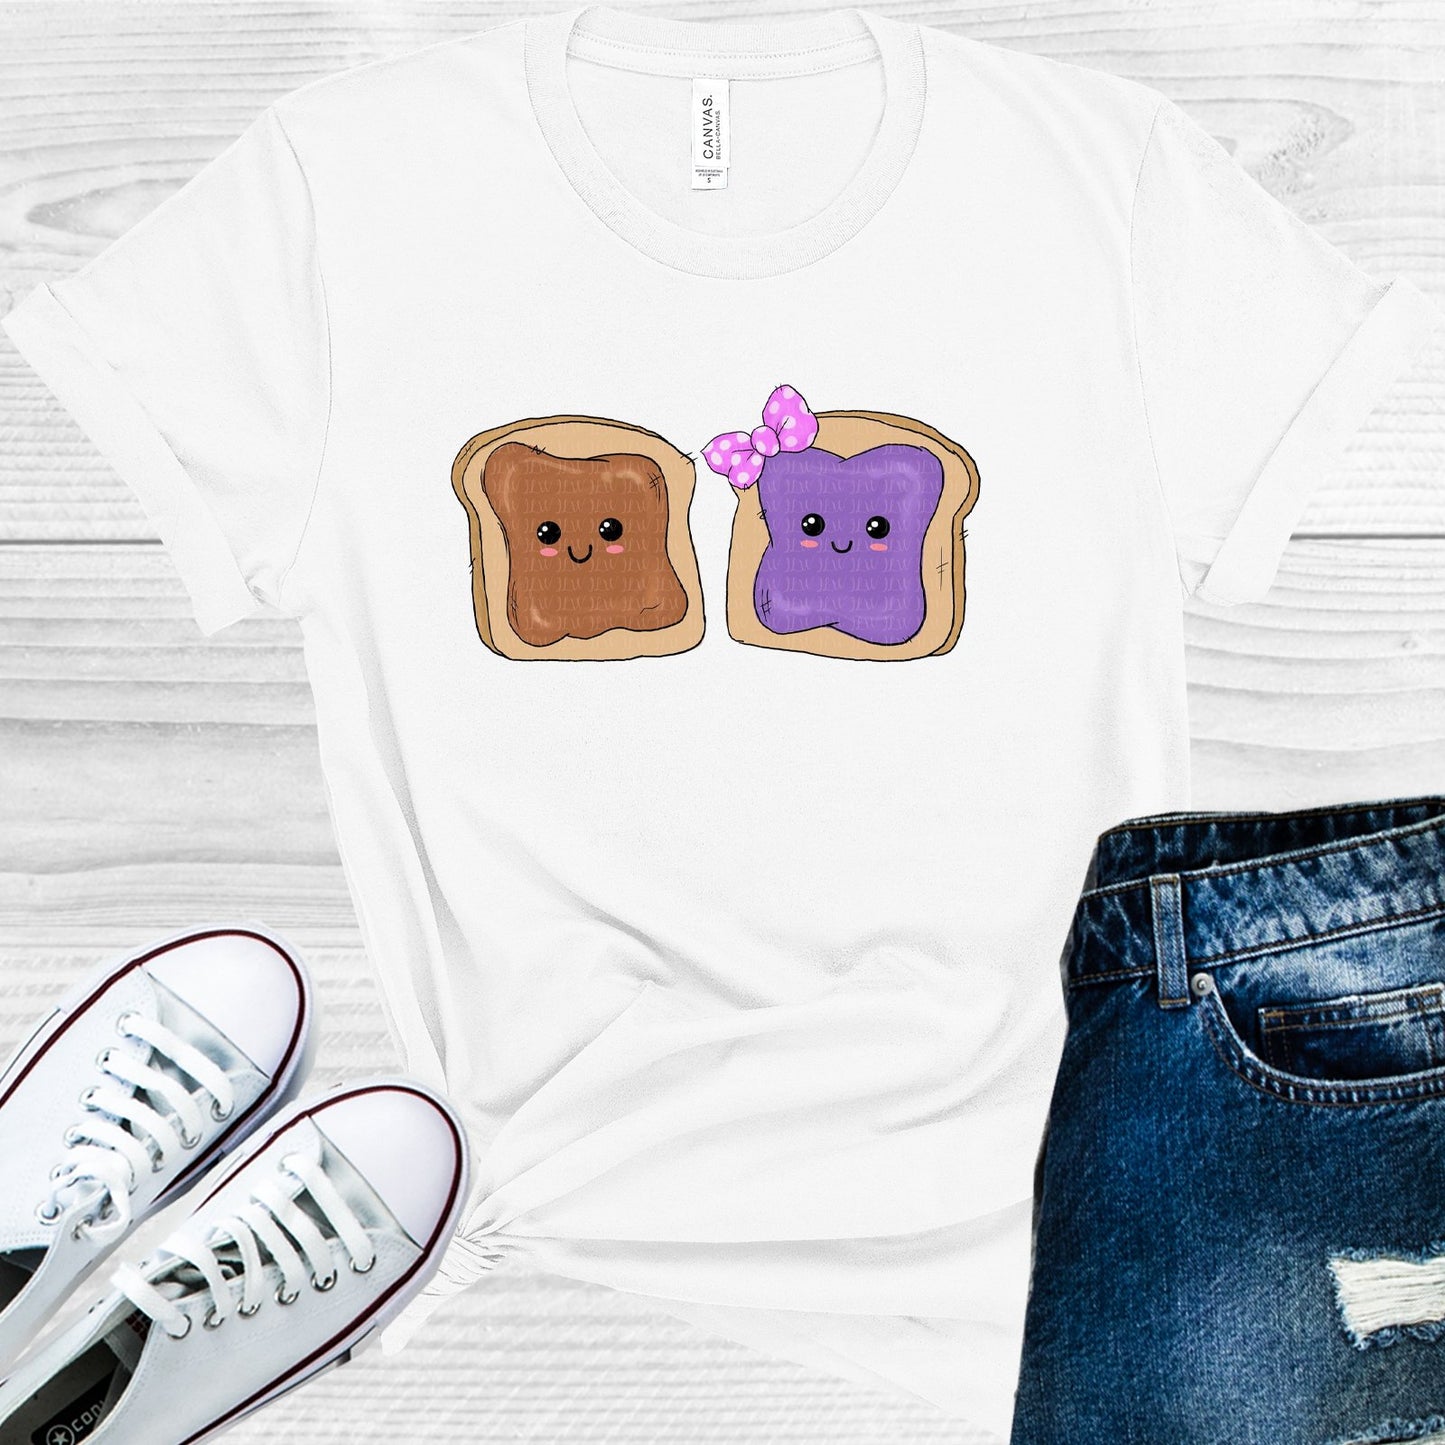 Peanut Butter & Jelly Graphic Tee Graphic Tee